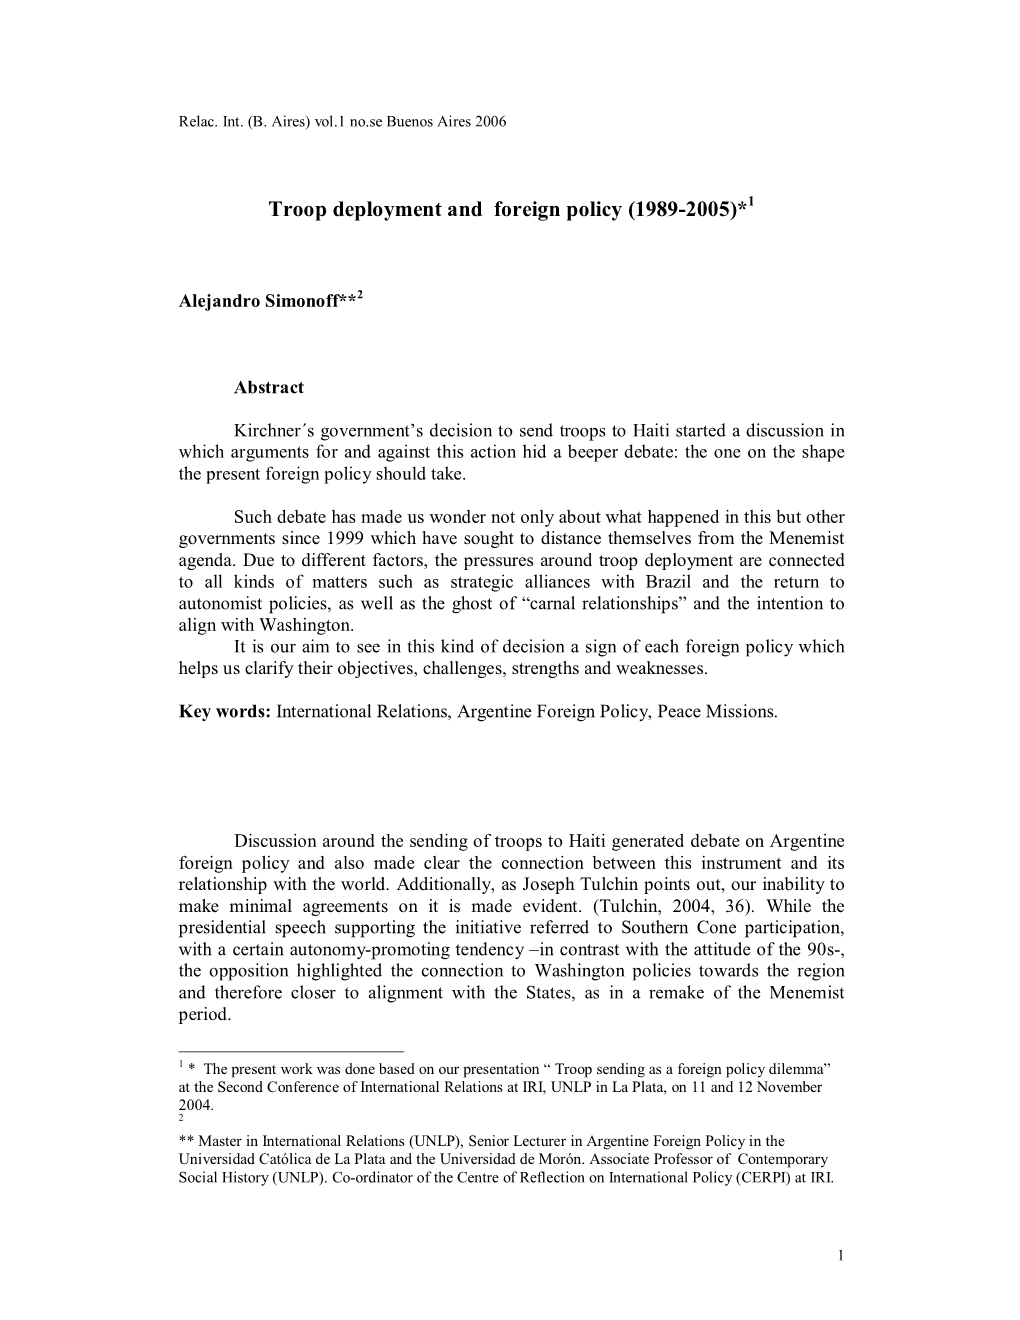 Troop Deployment and Foreign Policy (1989-2005)*1